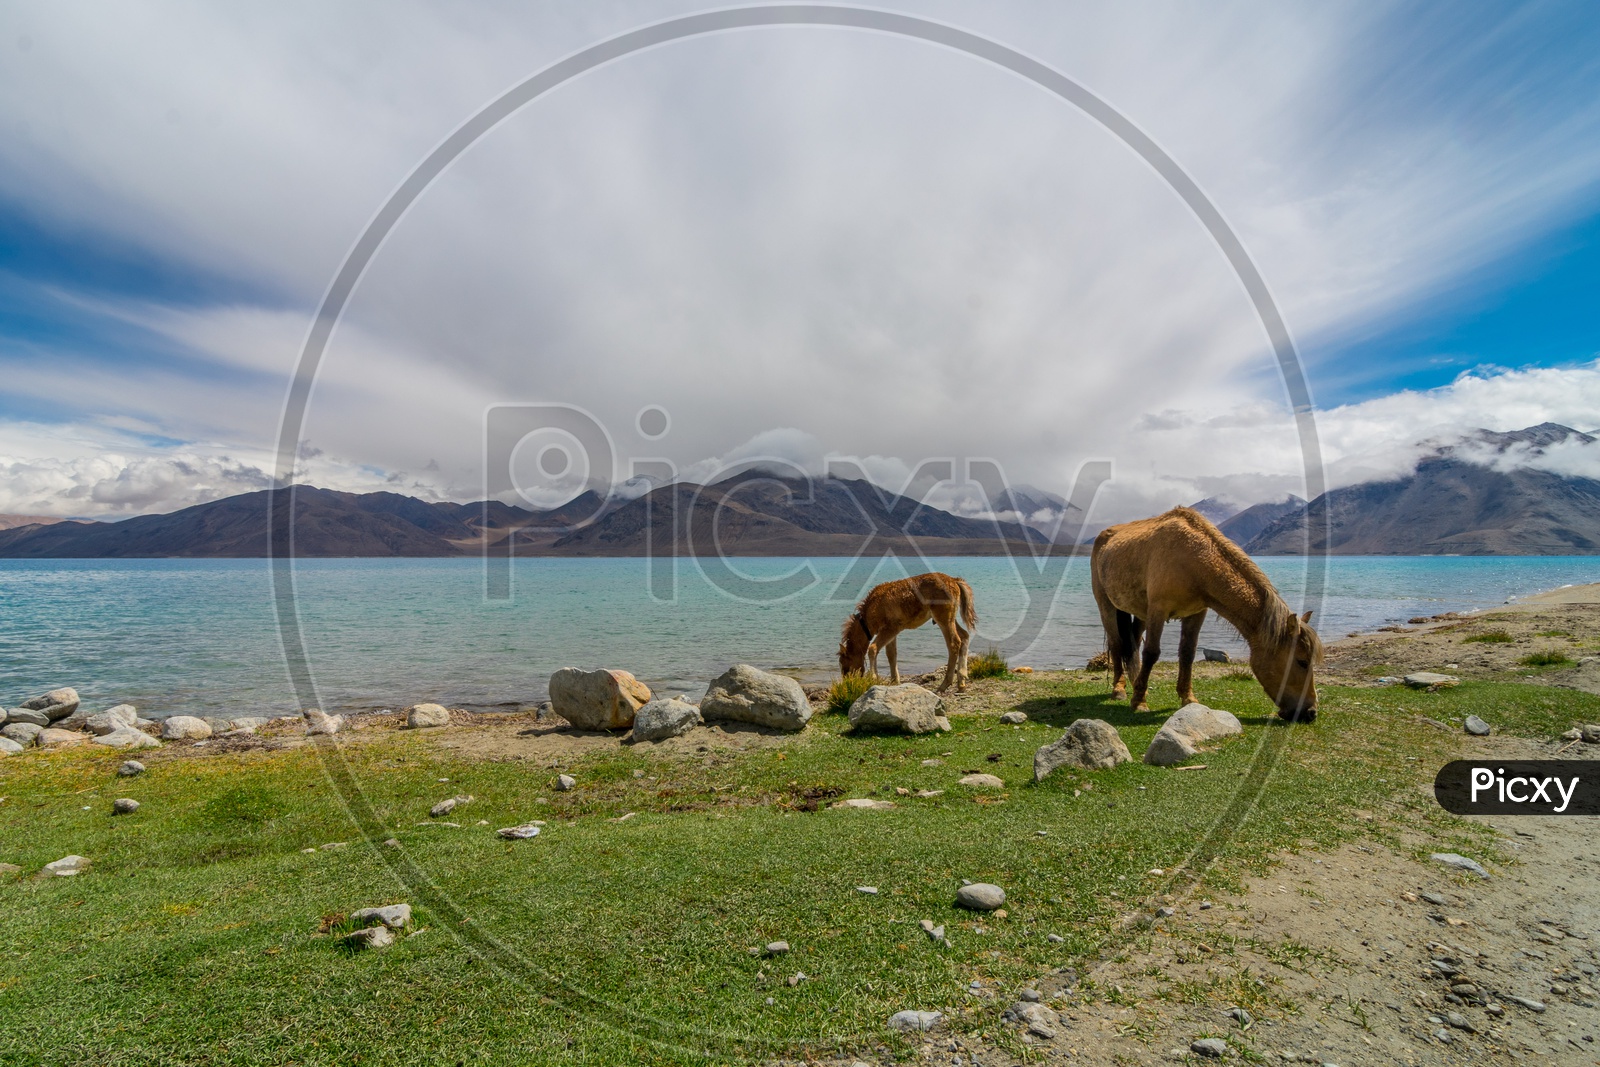 A Scenic view of Pangong Lake with horses grazing